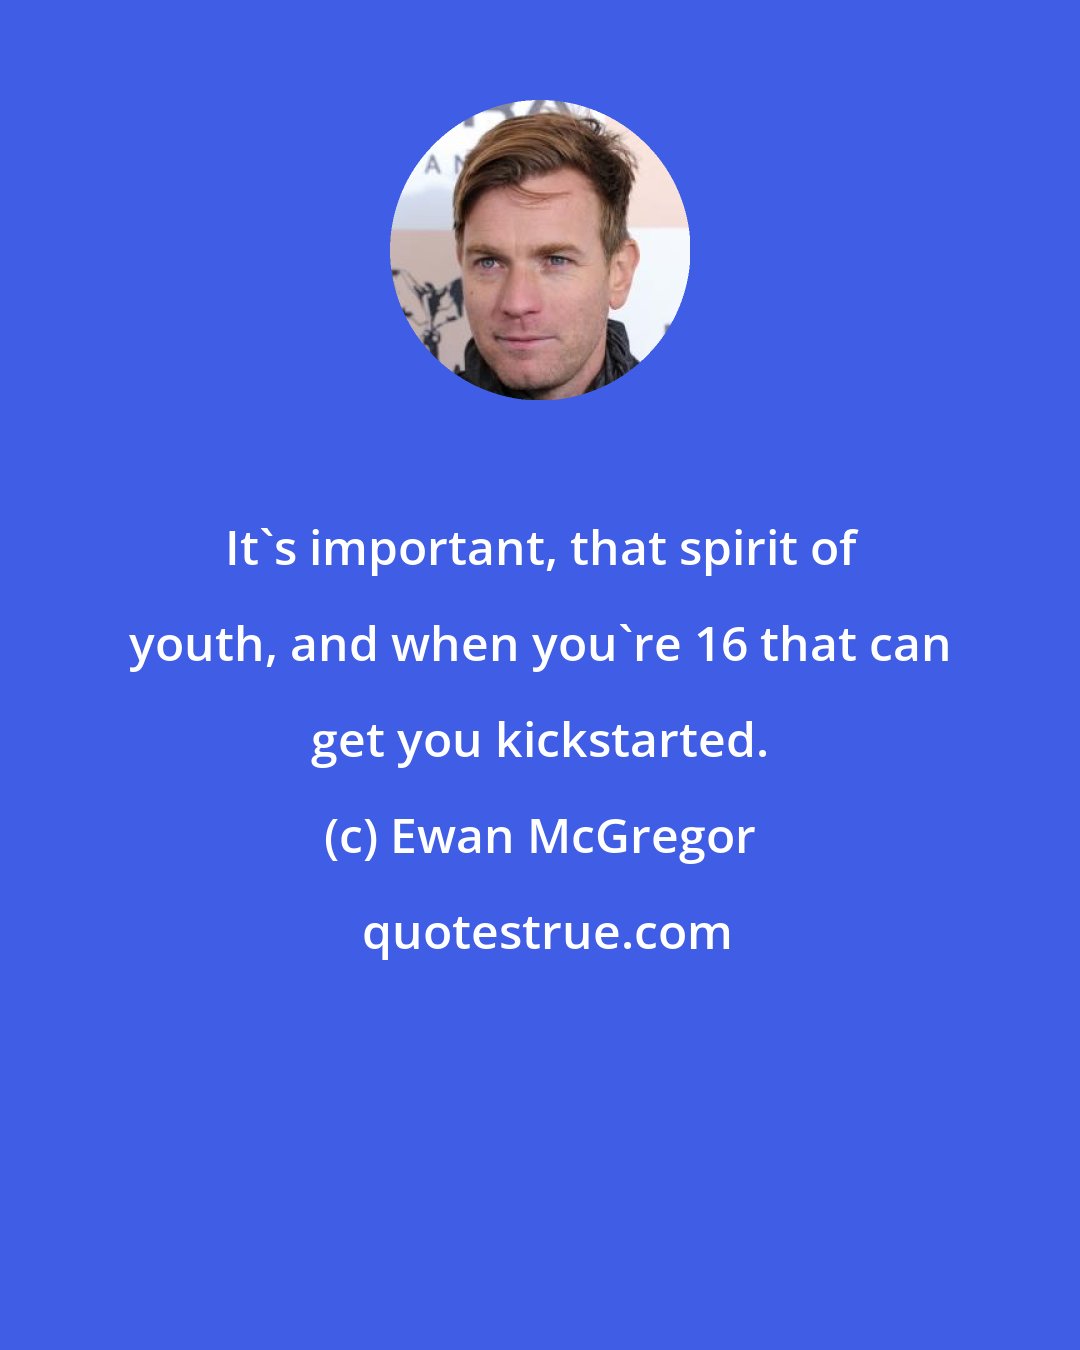 Ewan McGregor: It's important, that spirit of youth, and when you're 16 that can get you kickstarted.